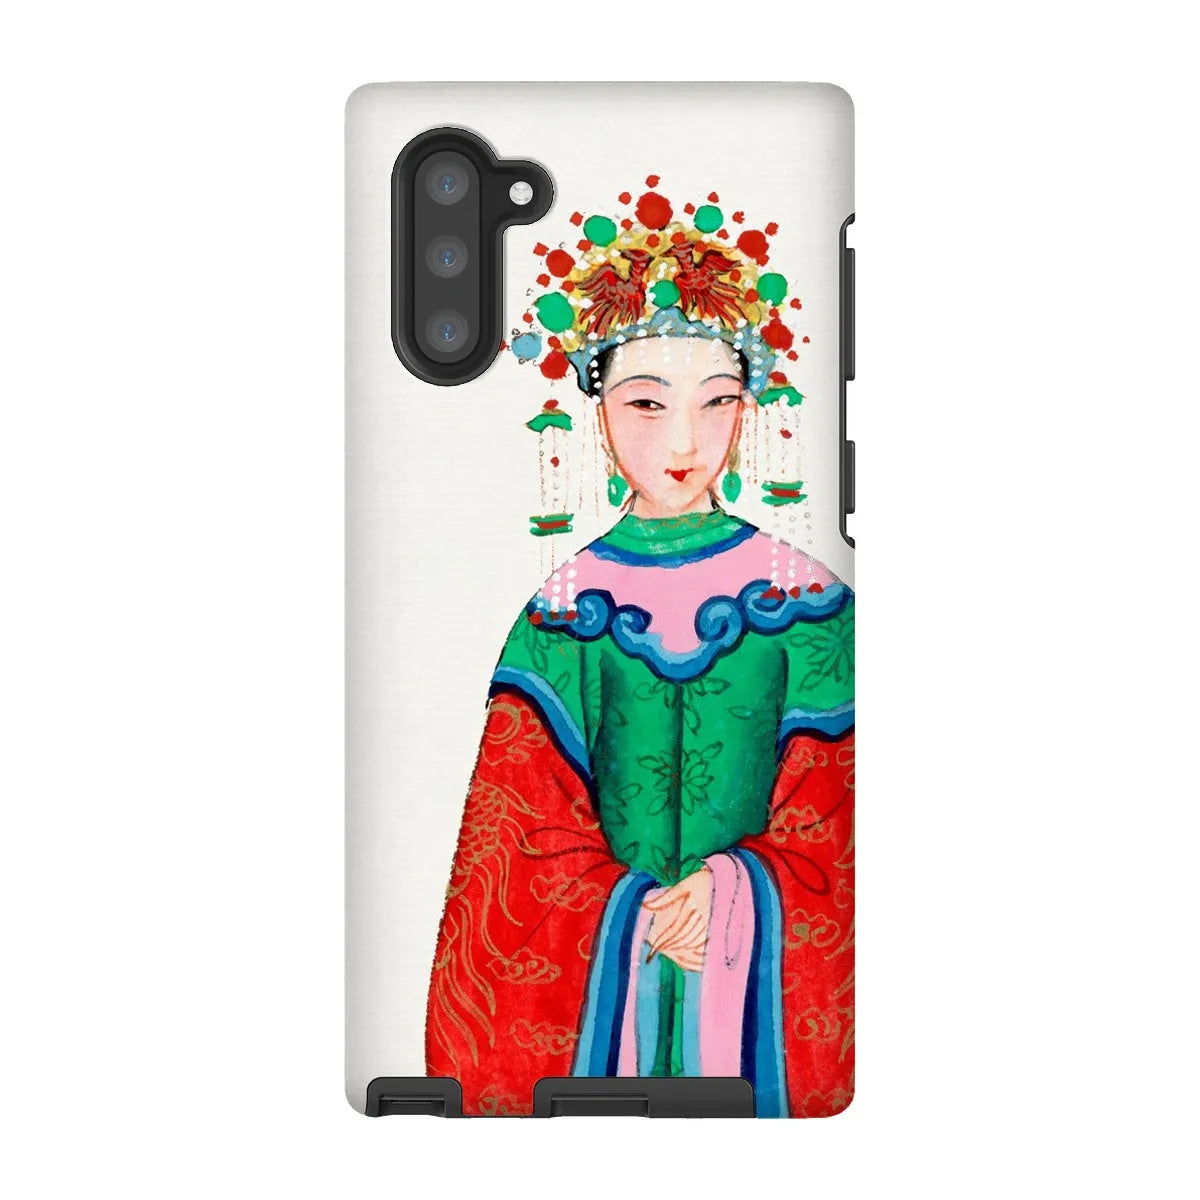 Imperial Princess - Chinese Aesthetic Painting Phone Case - Samsung Galaxy Note 10 / Matte - Mobile Phone Cases